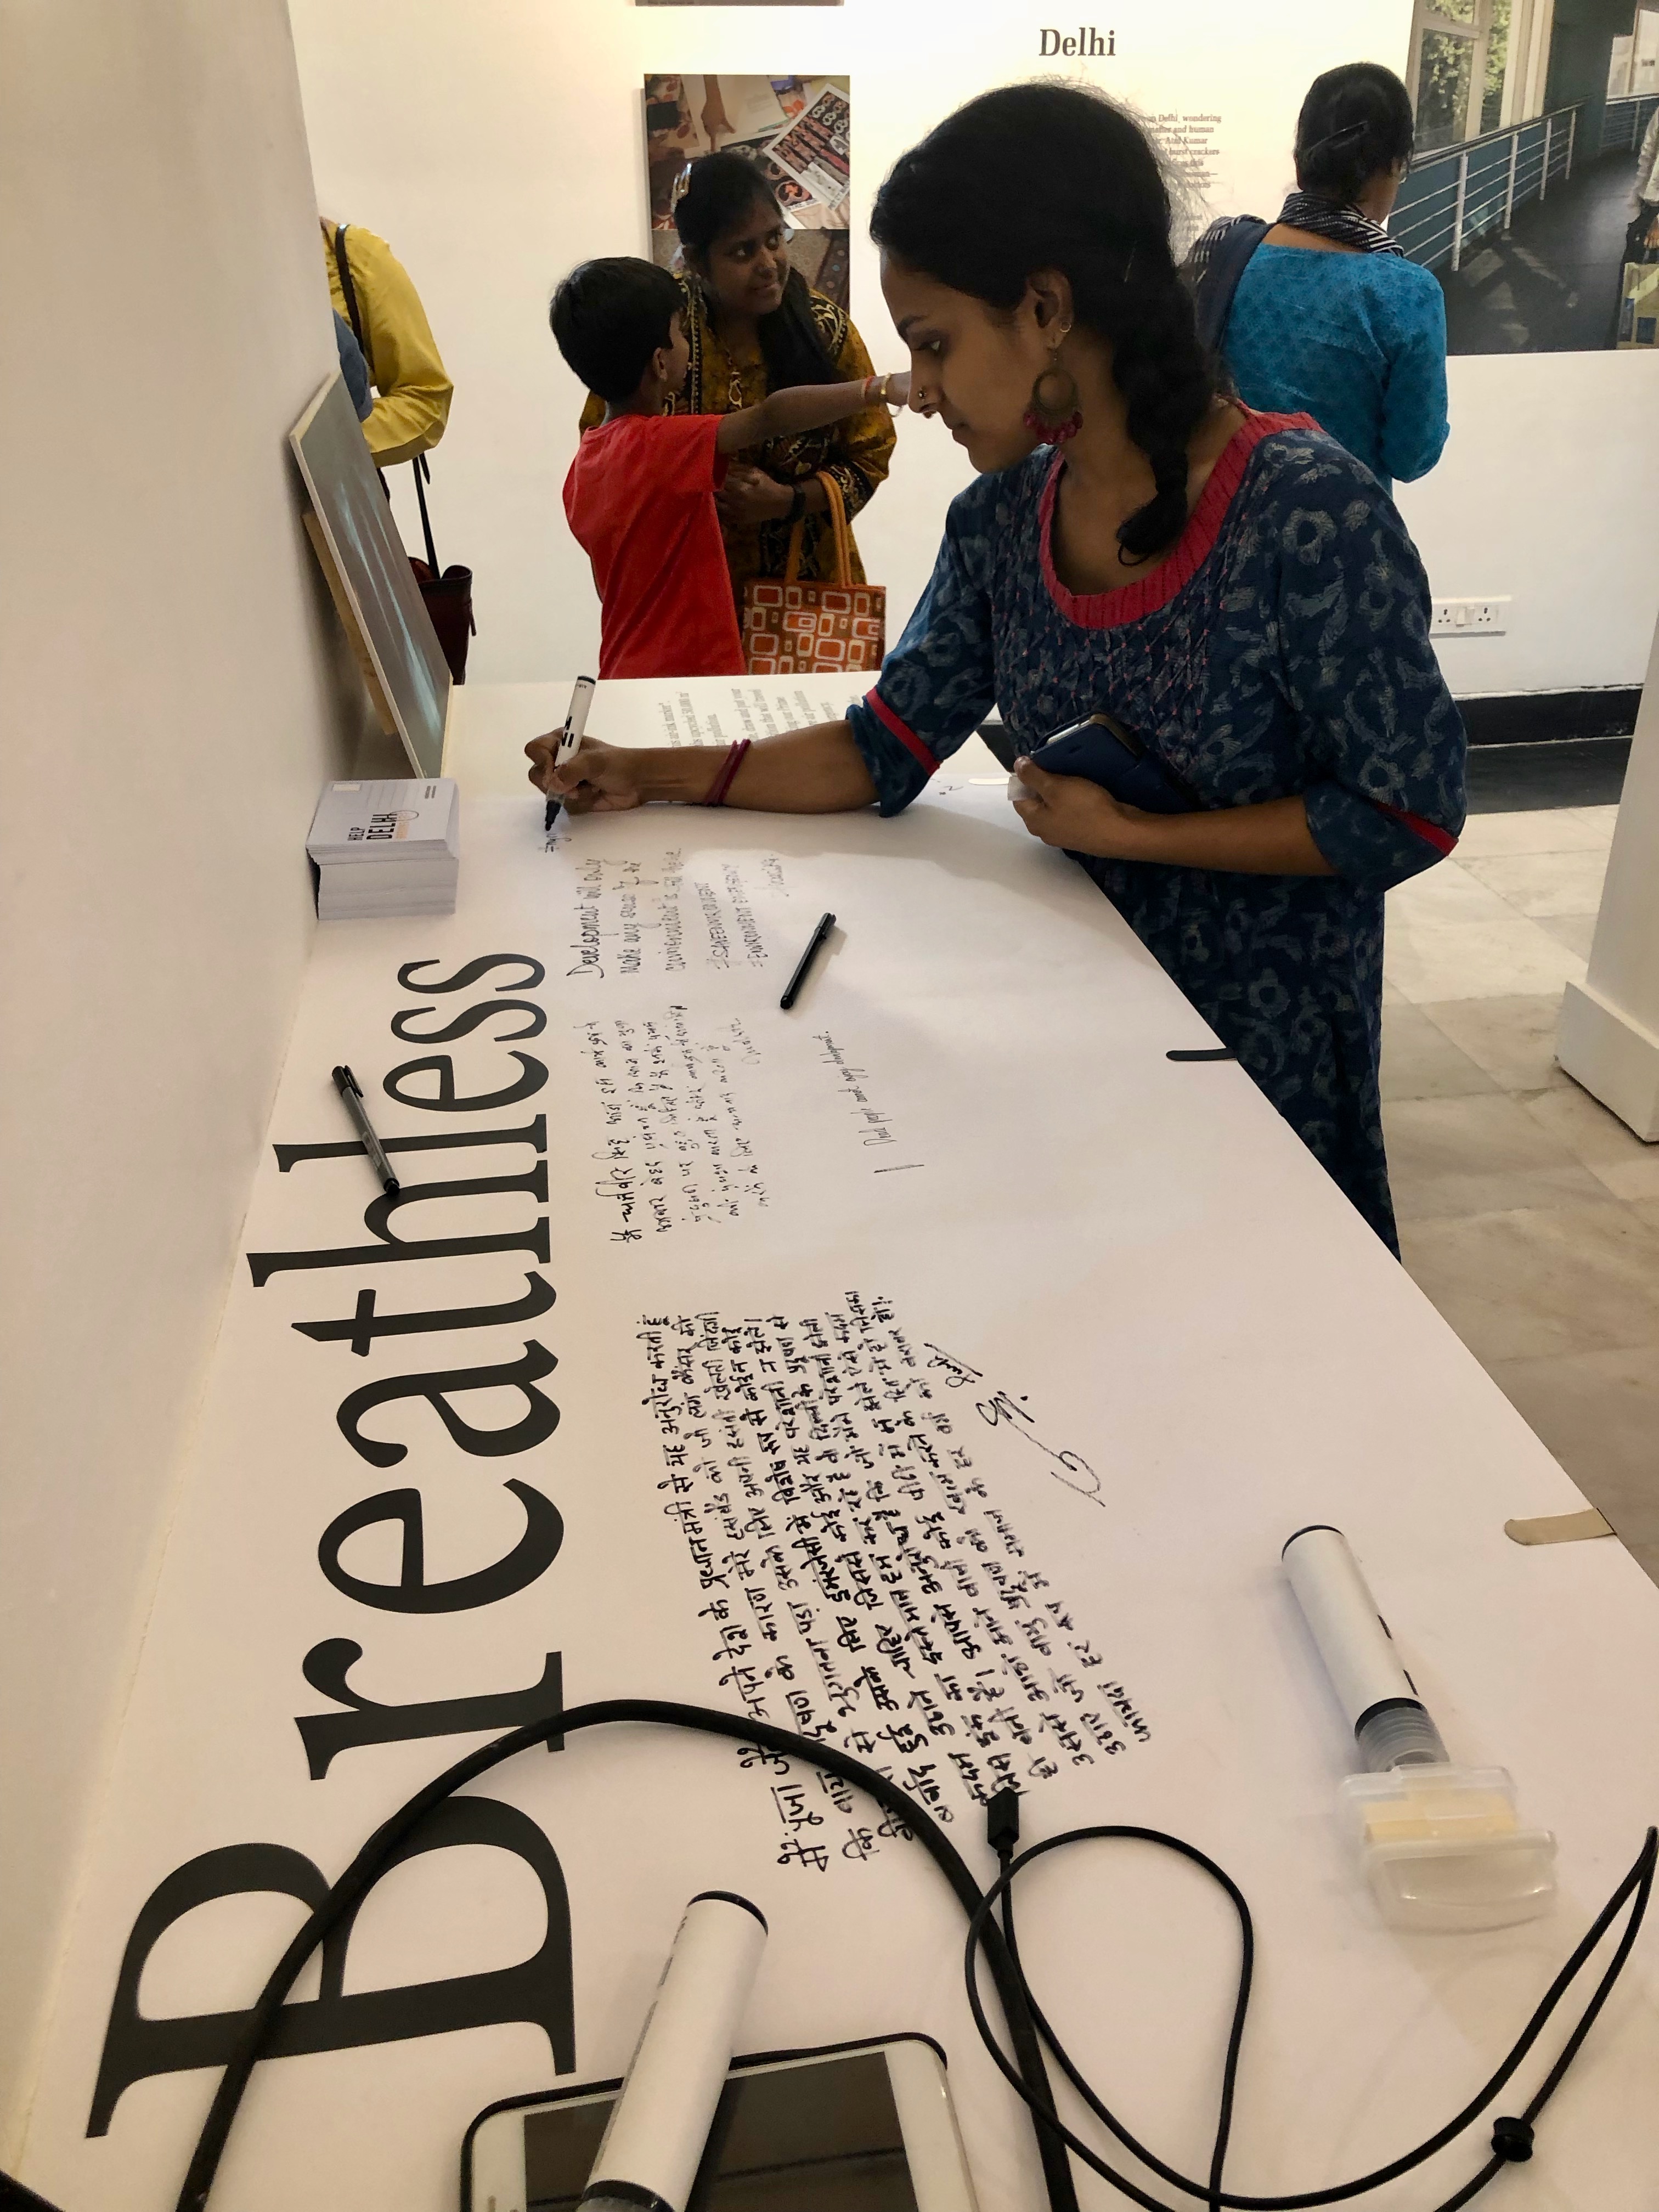 A woman writing on a poster that says "Breathless"